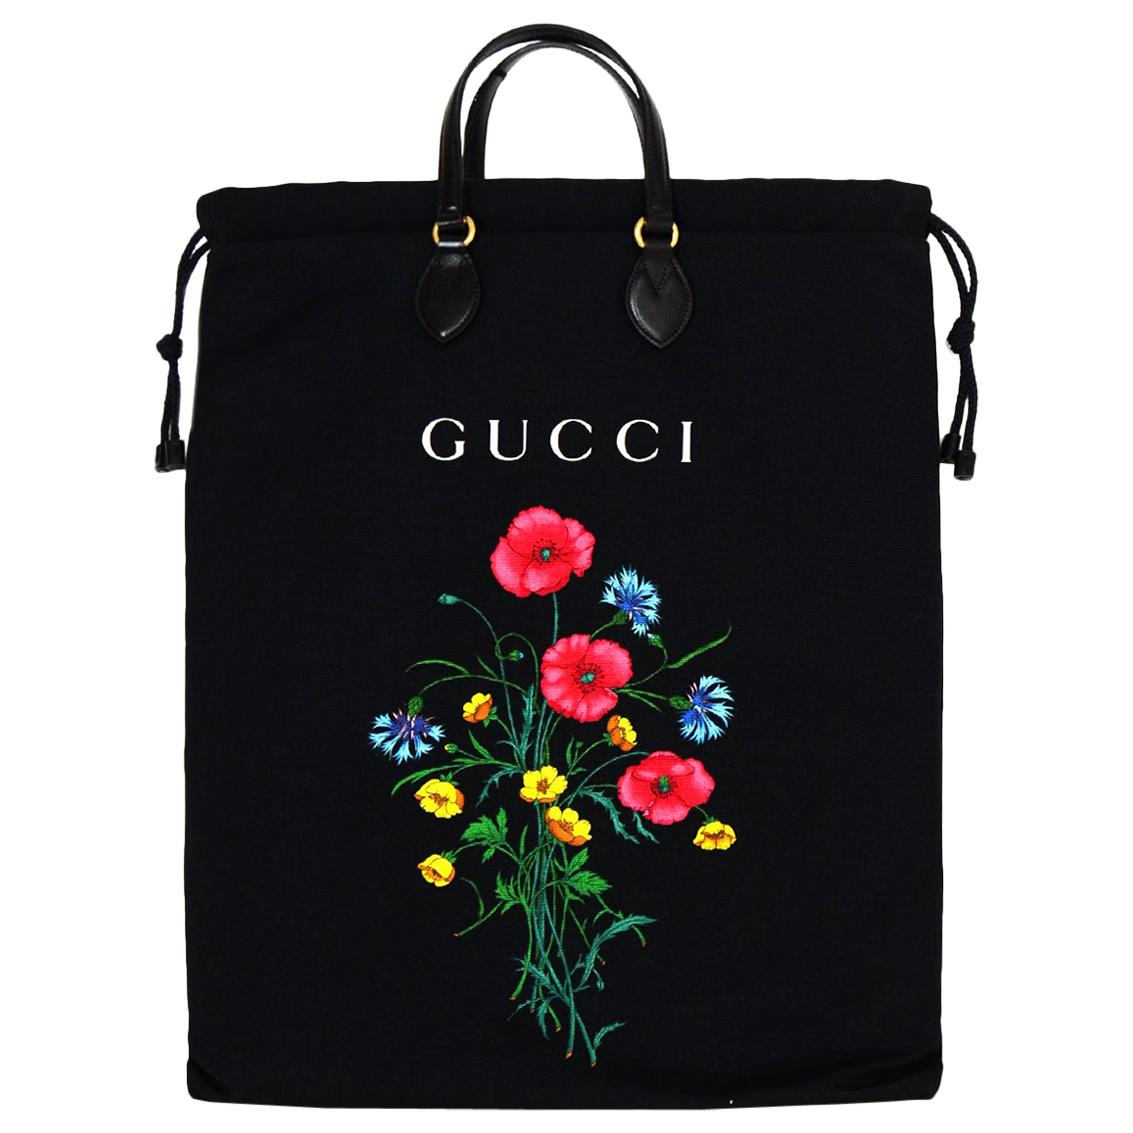 Gucci NWT Black Canvas Drawstring Tote Bag w/ Chateu Marmont and Floral ...